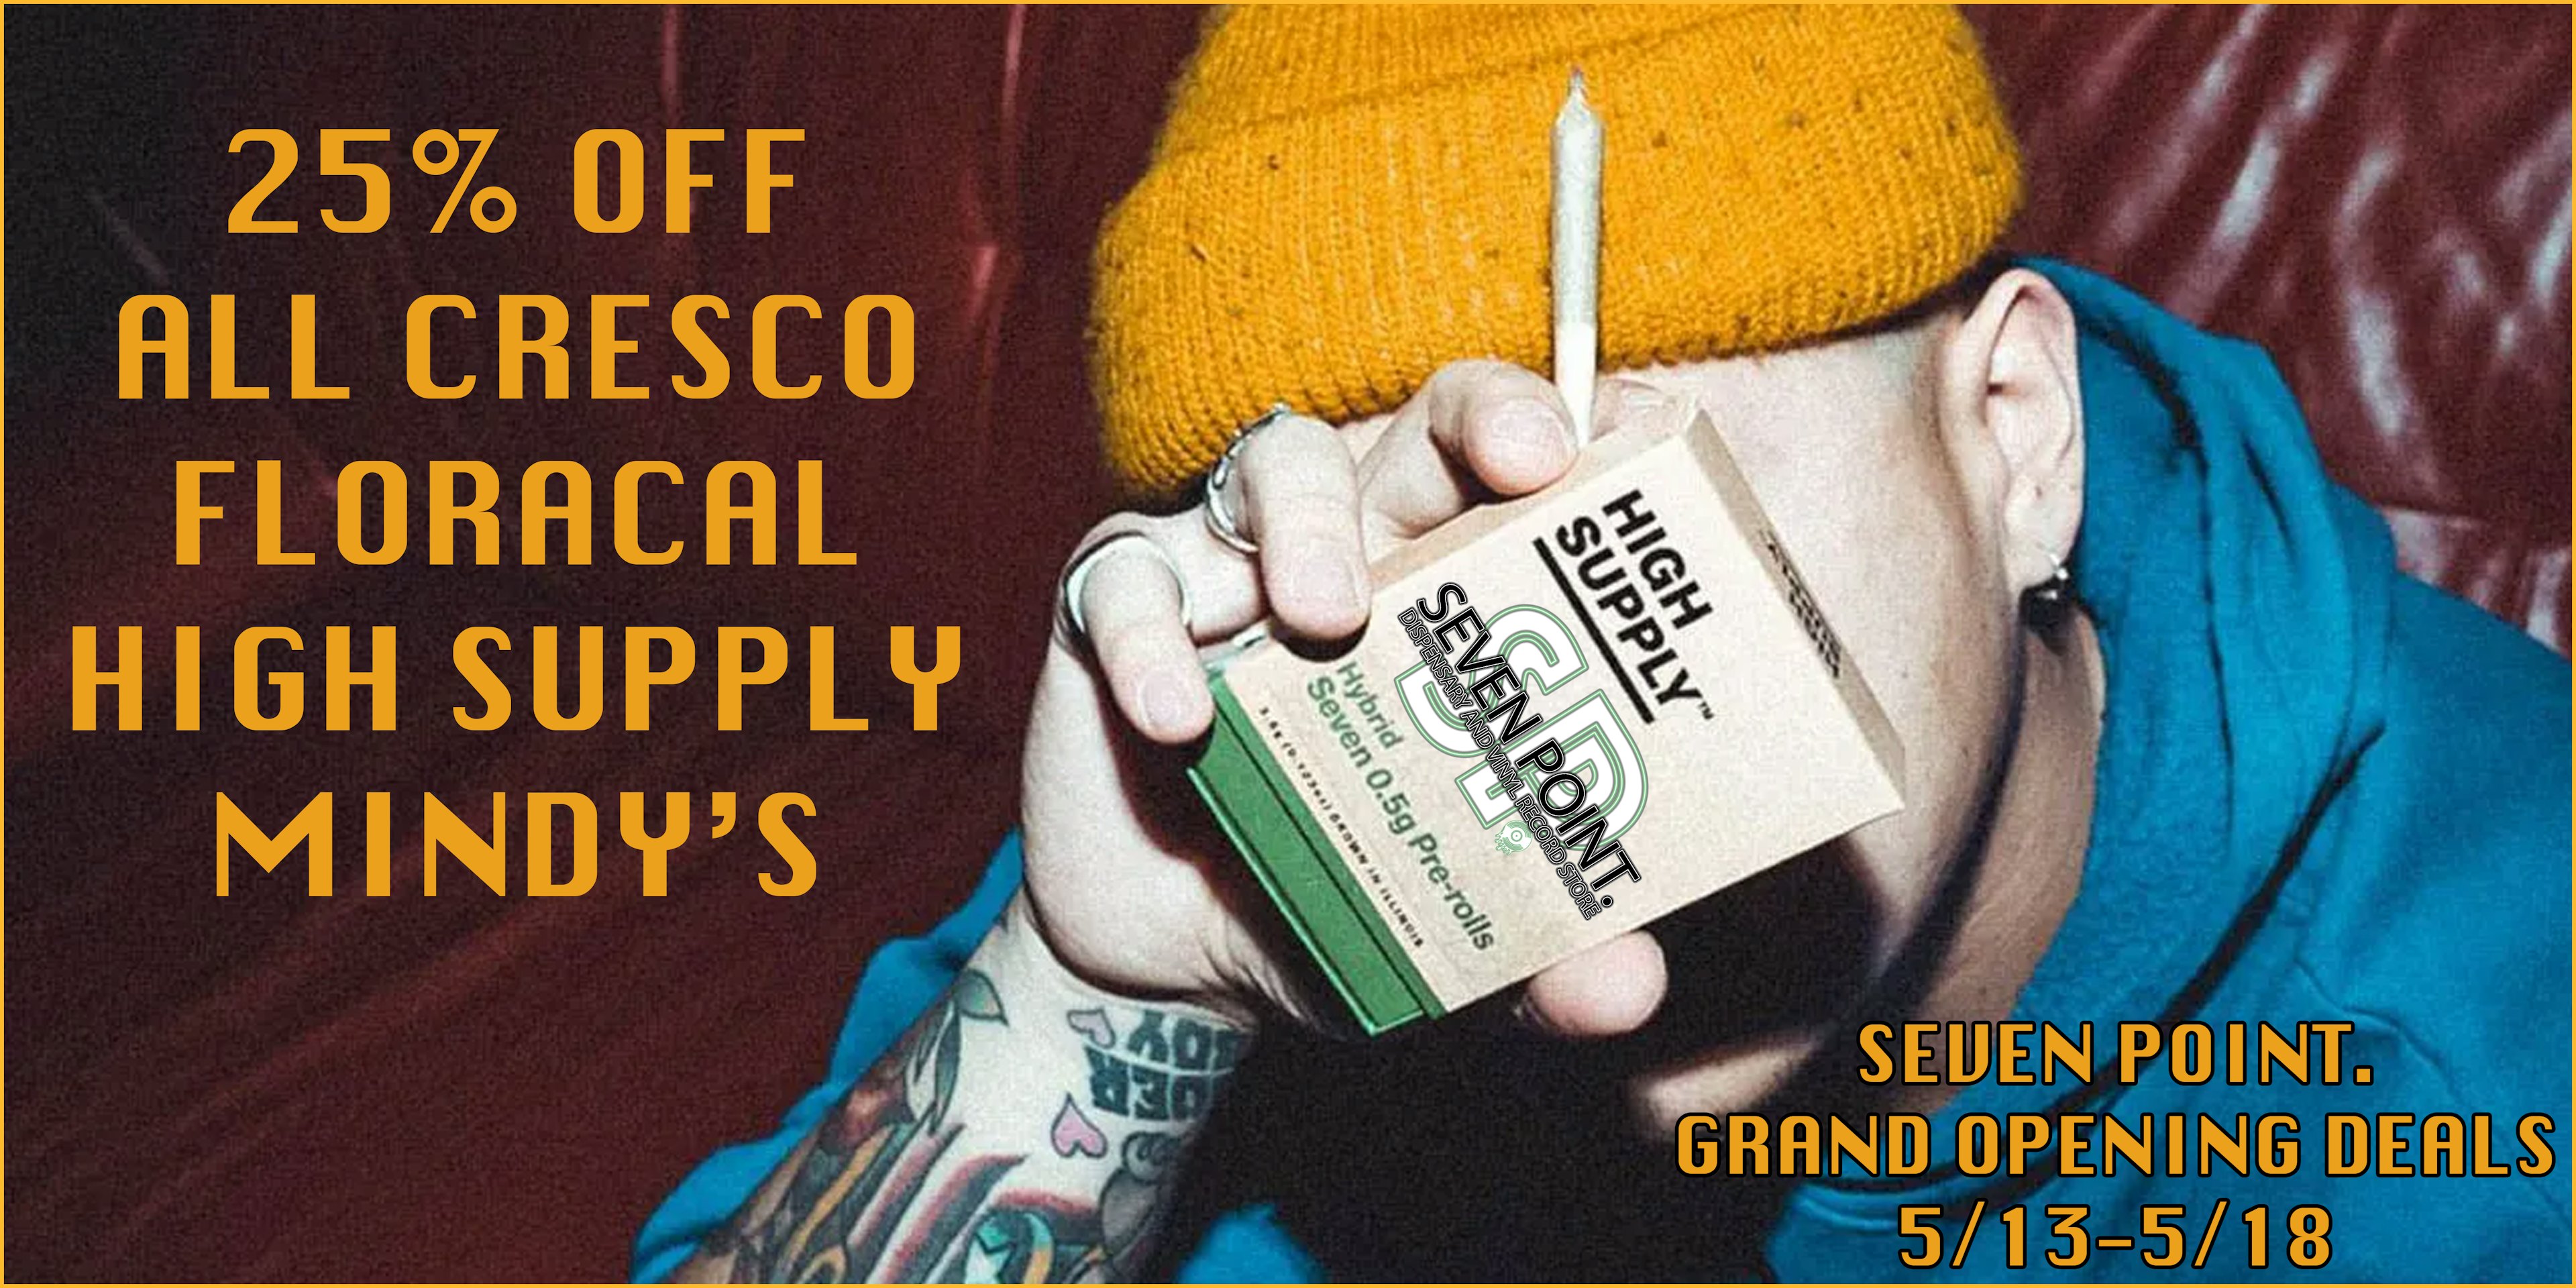 SAVE 25% OFF OF ALL CRESCO/HIGH SUPPLY